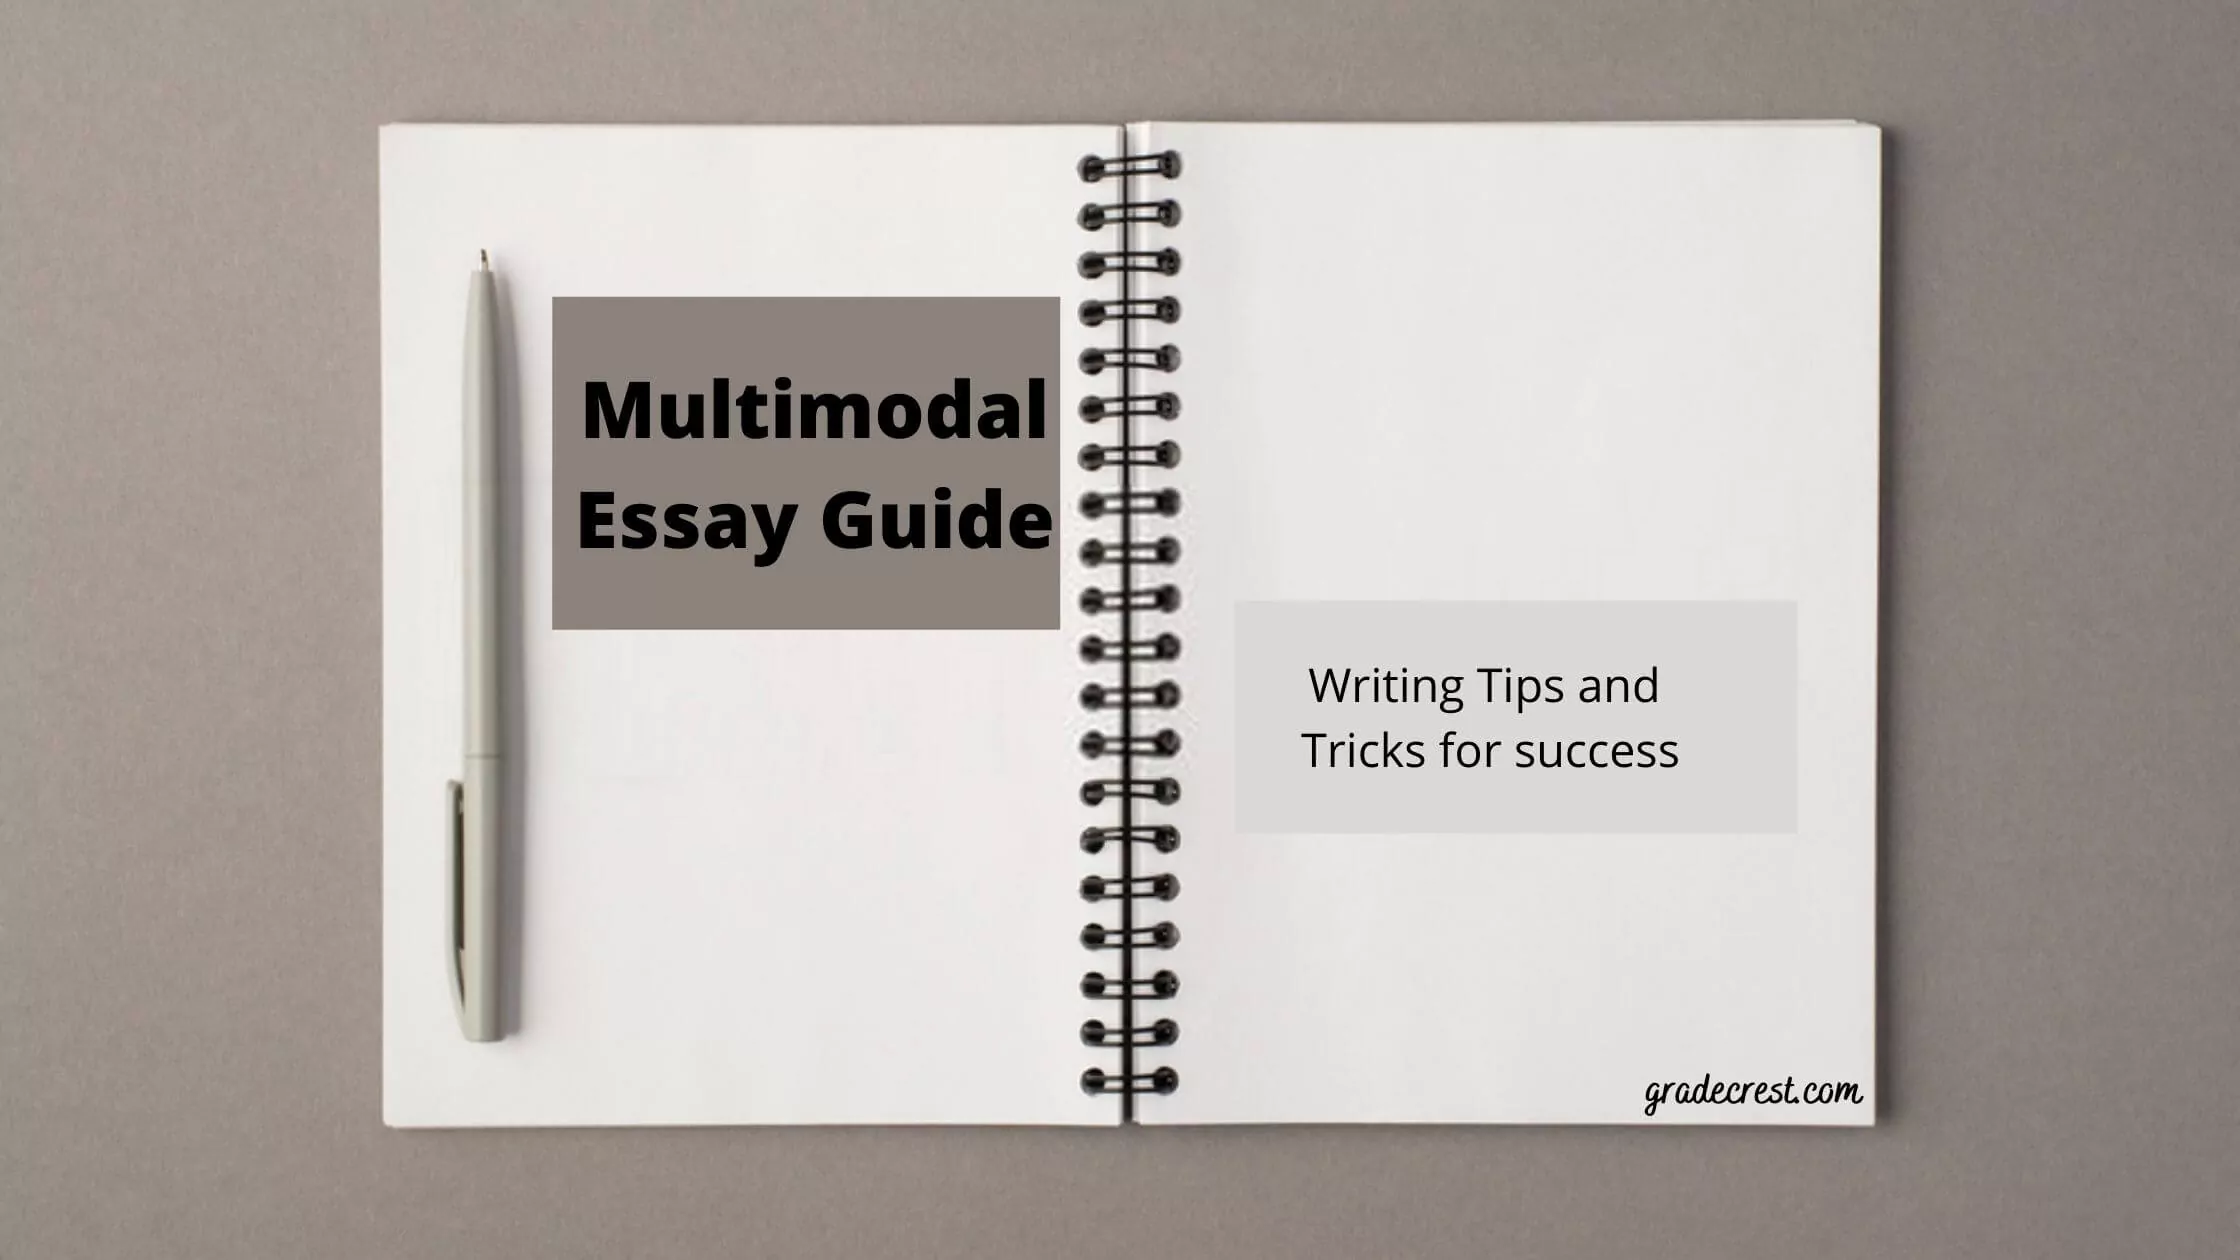 How to write a multimodal essay